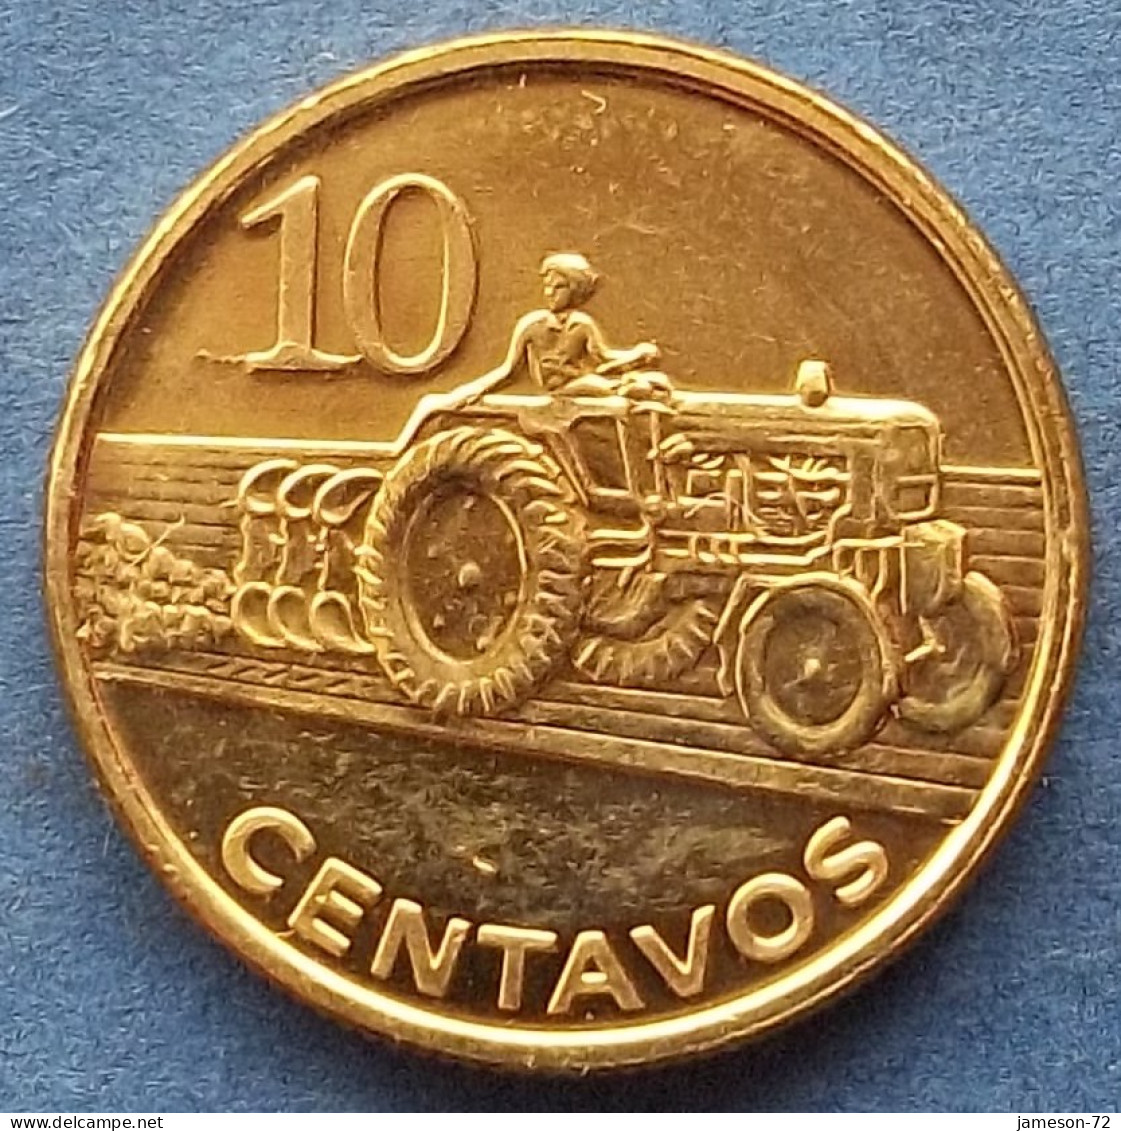 MOZAMBIQUE - 10 Centavos 2006 "Farmer Cultivating" KM# 134 Peoples Republic Reform Coinage (2006) - Edelweiss Coins - Mozambico